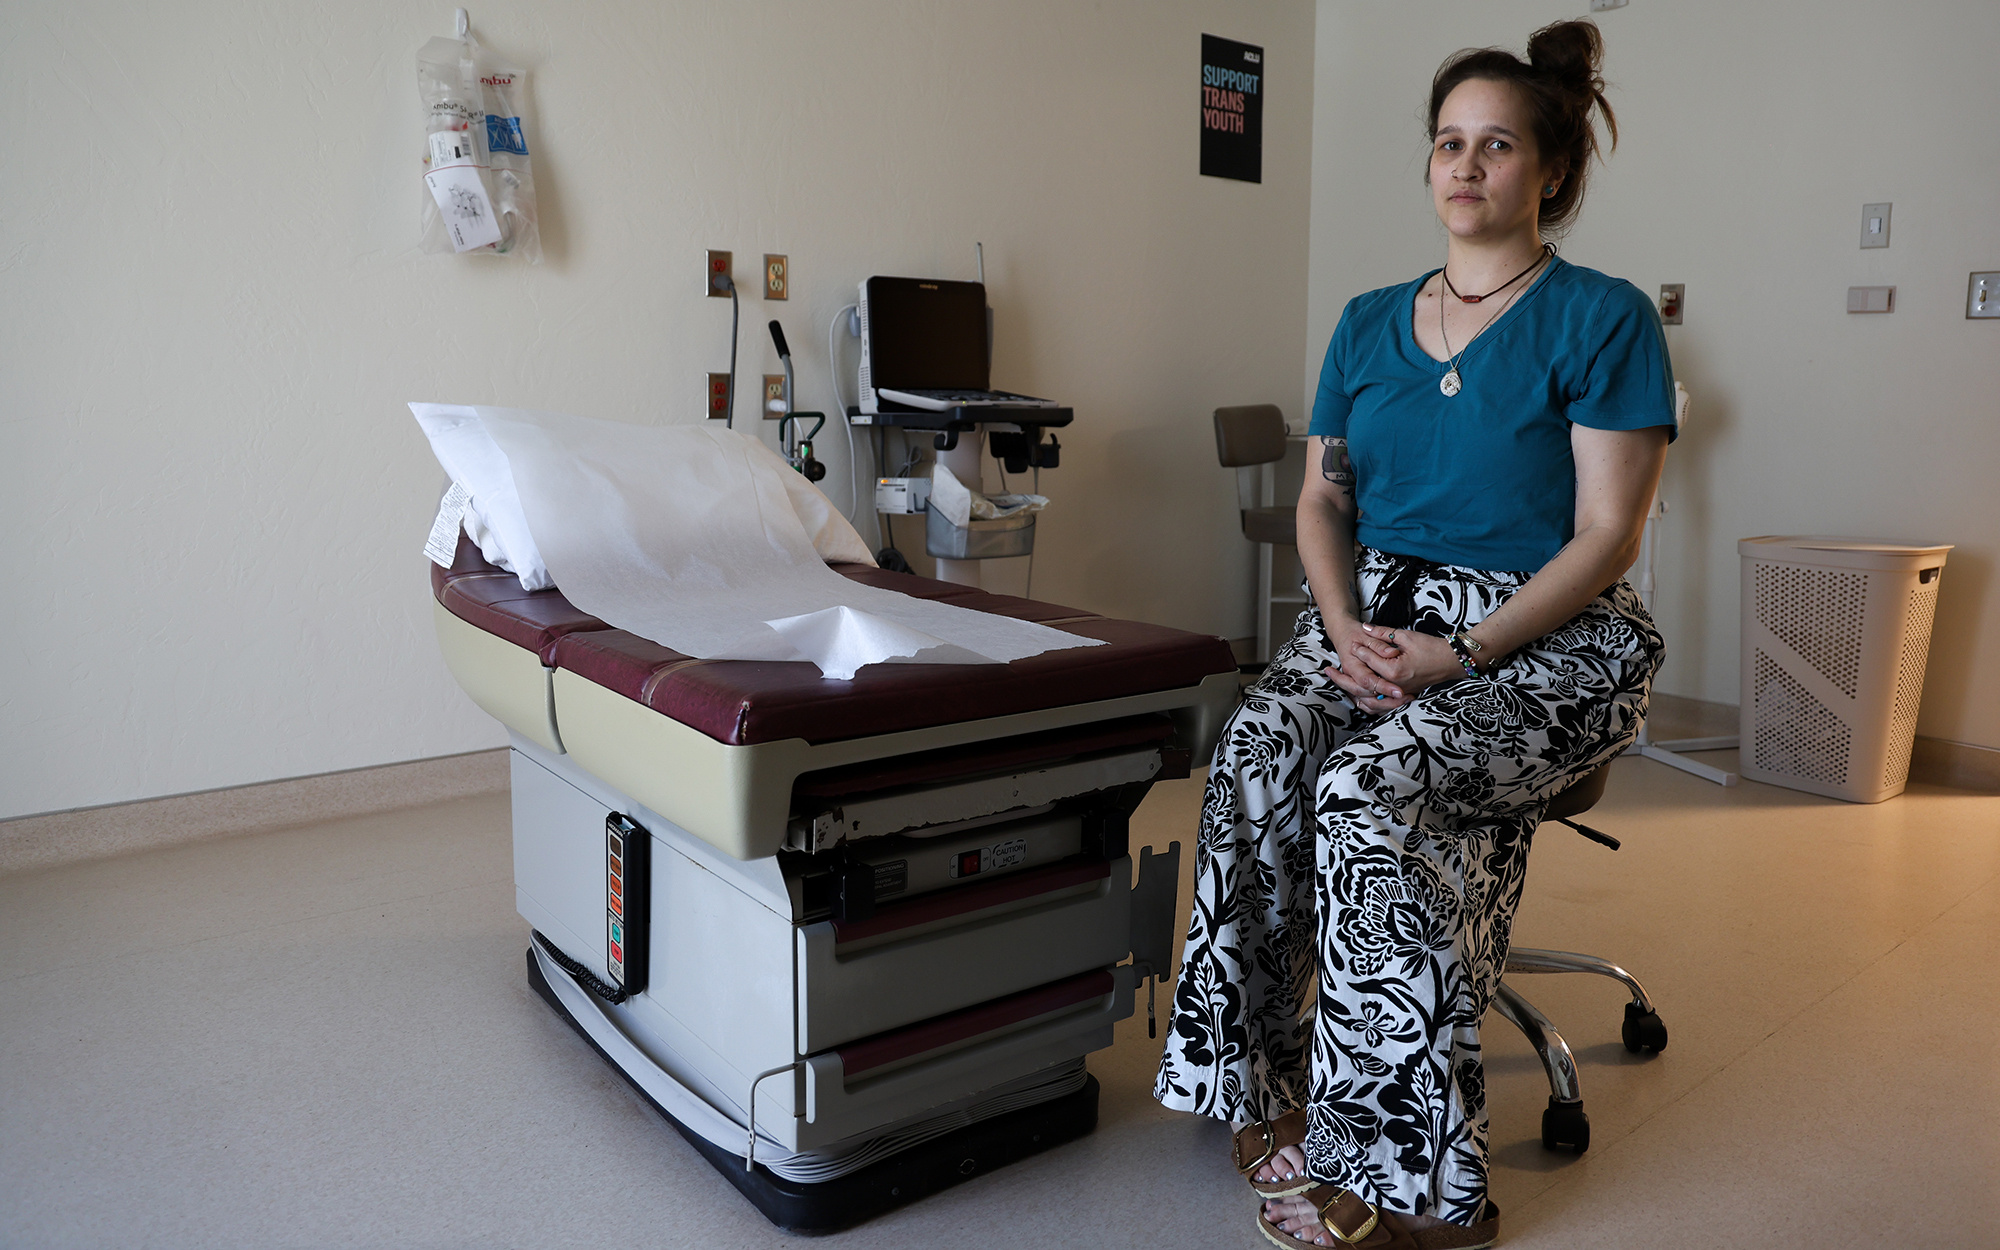 Kailey Voellinger is former clinic director of Trust Women in Oklahoma City. Before that state’s abortion ban, Trust Women was a go-to clinic for Indigenous patients seeking abortion care. (Photo by Maddy Keyes/News21)